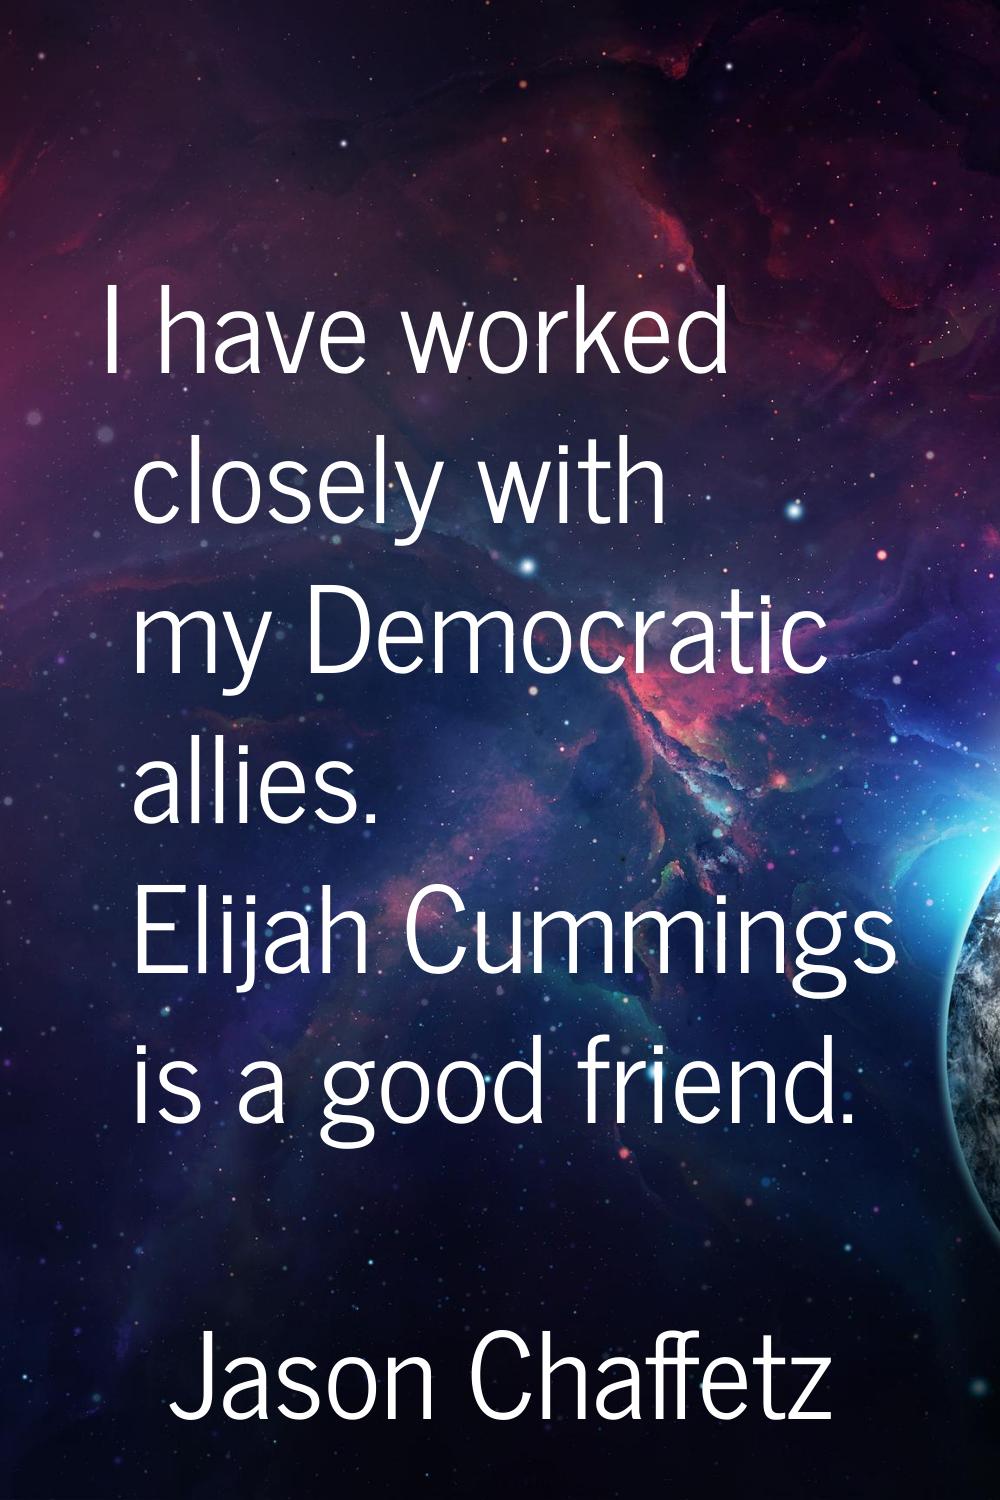 I have worked closely with my Democratic allies. Elijah Cummings is a good friend.